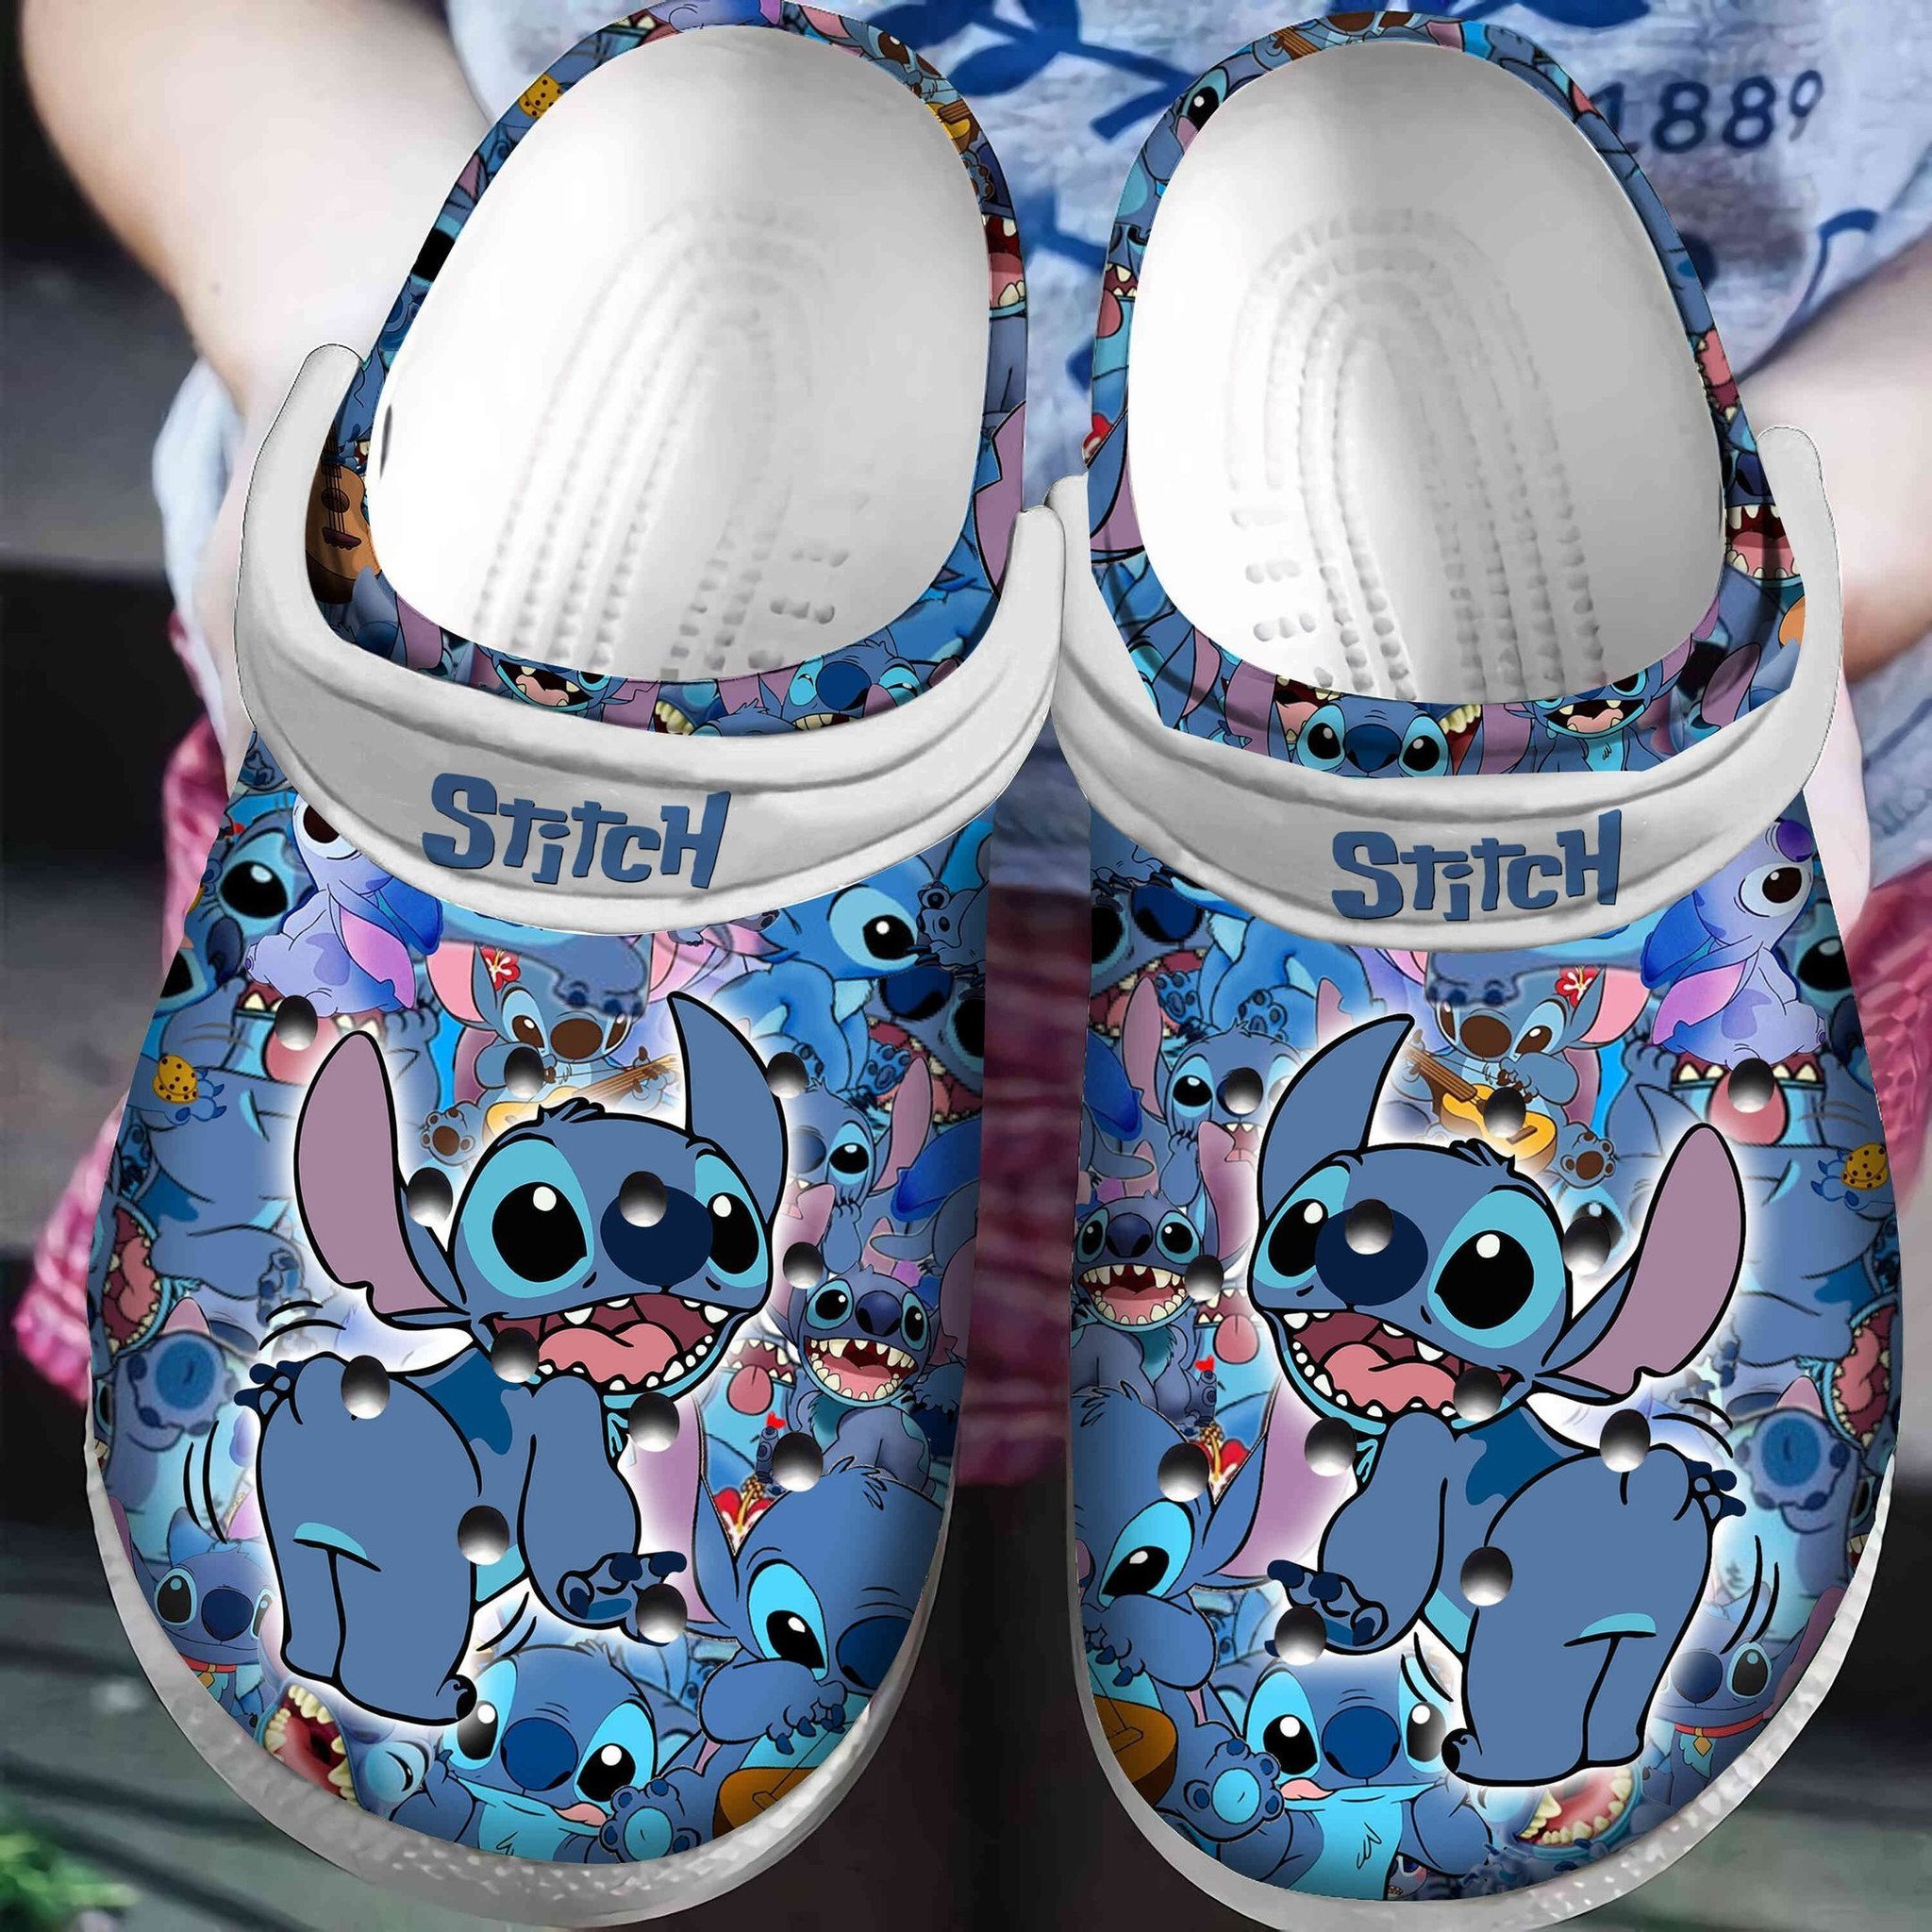 Stitch Lilo And Stitch For Men And Women Rubber Crocs Crocband Clogs